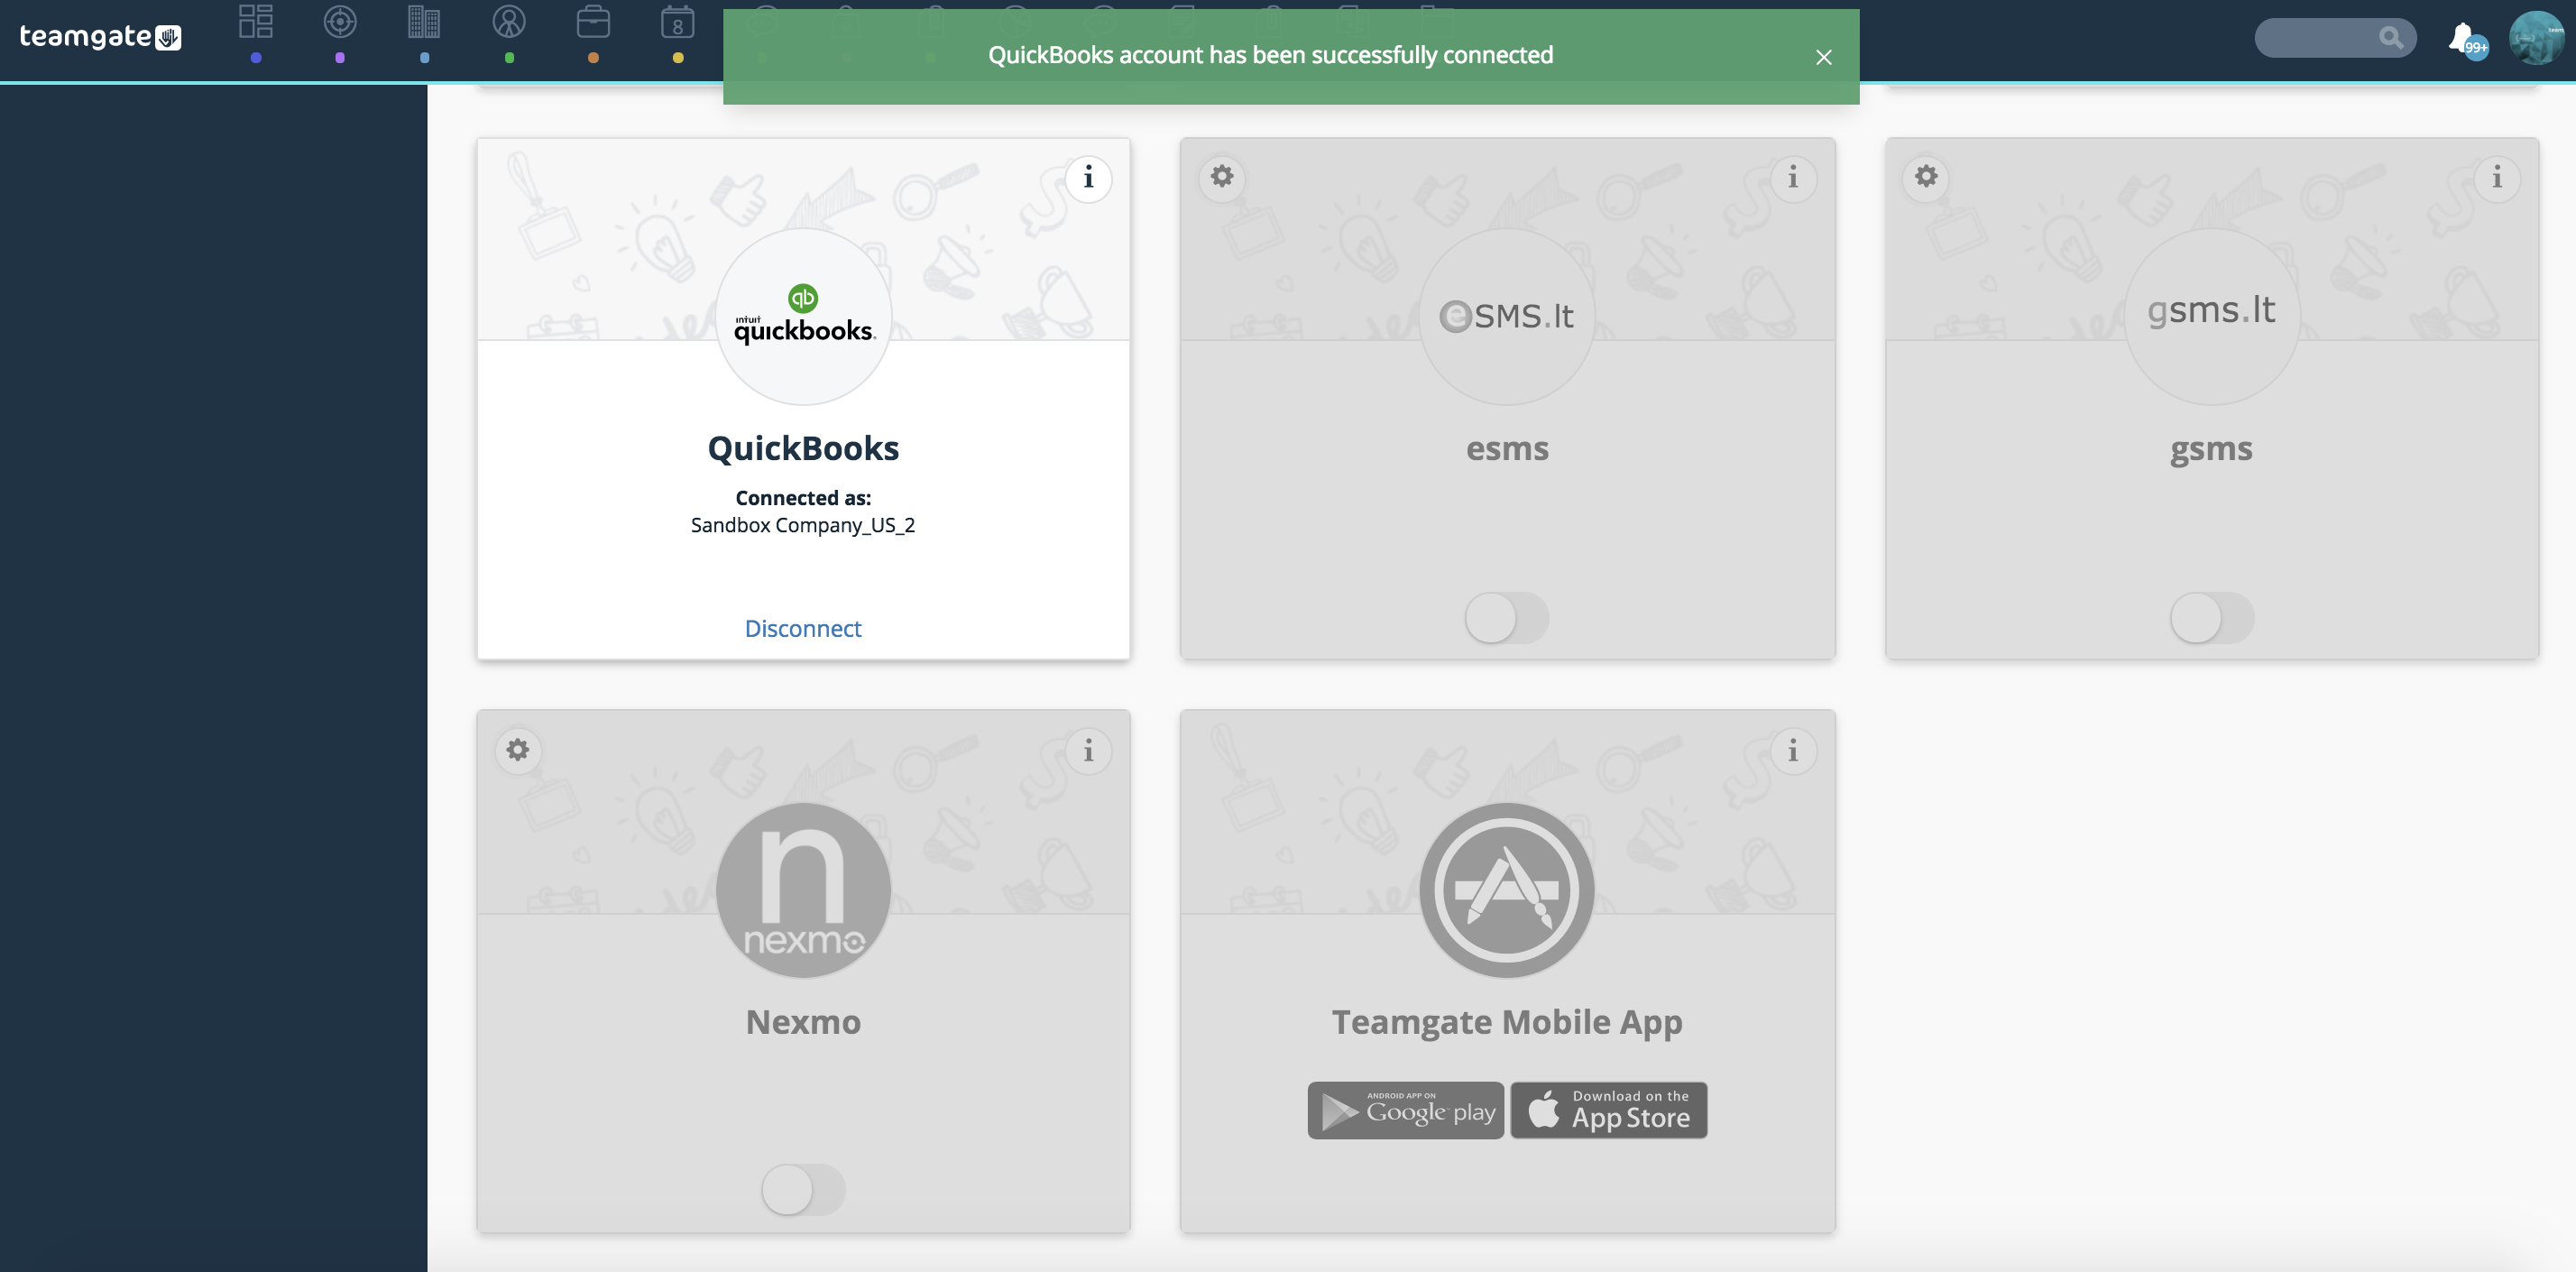 quickbooks-account-has-been-connected-successfully-teamgate-integrations.png